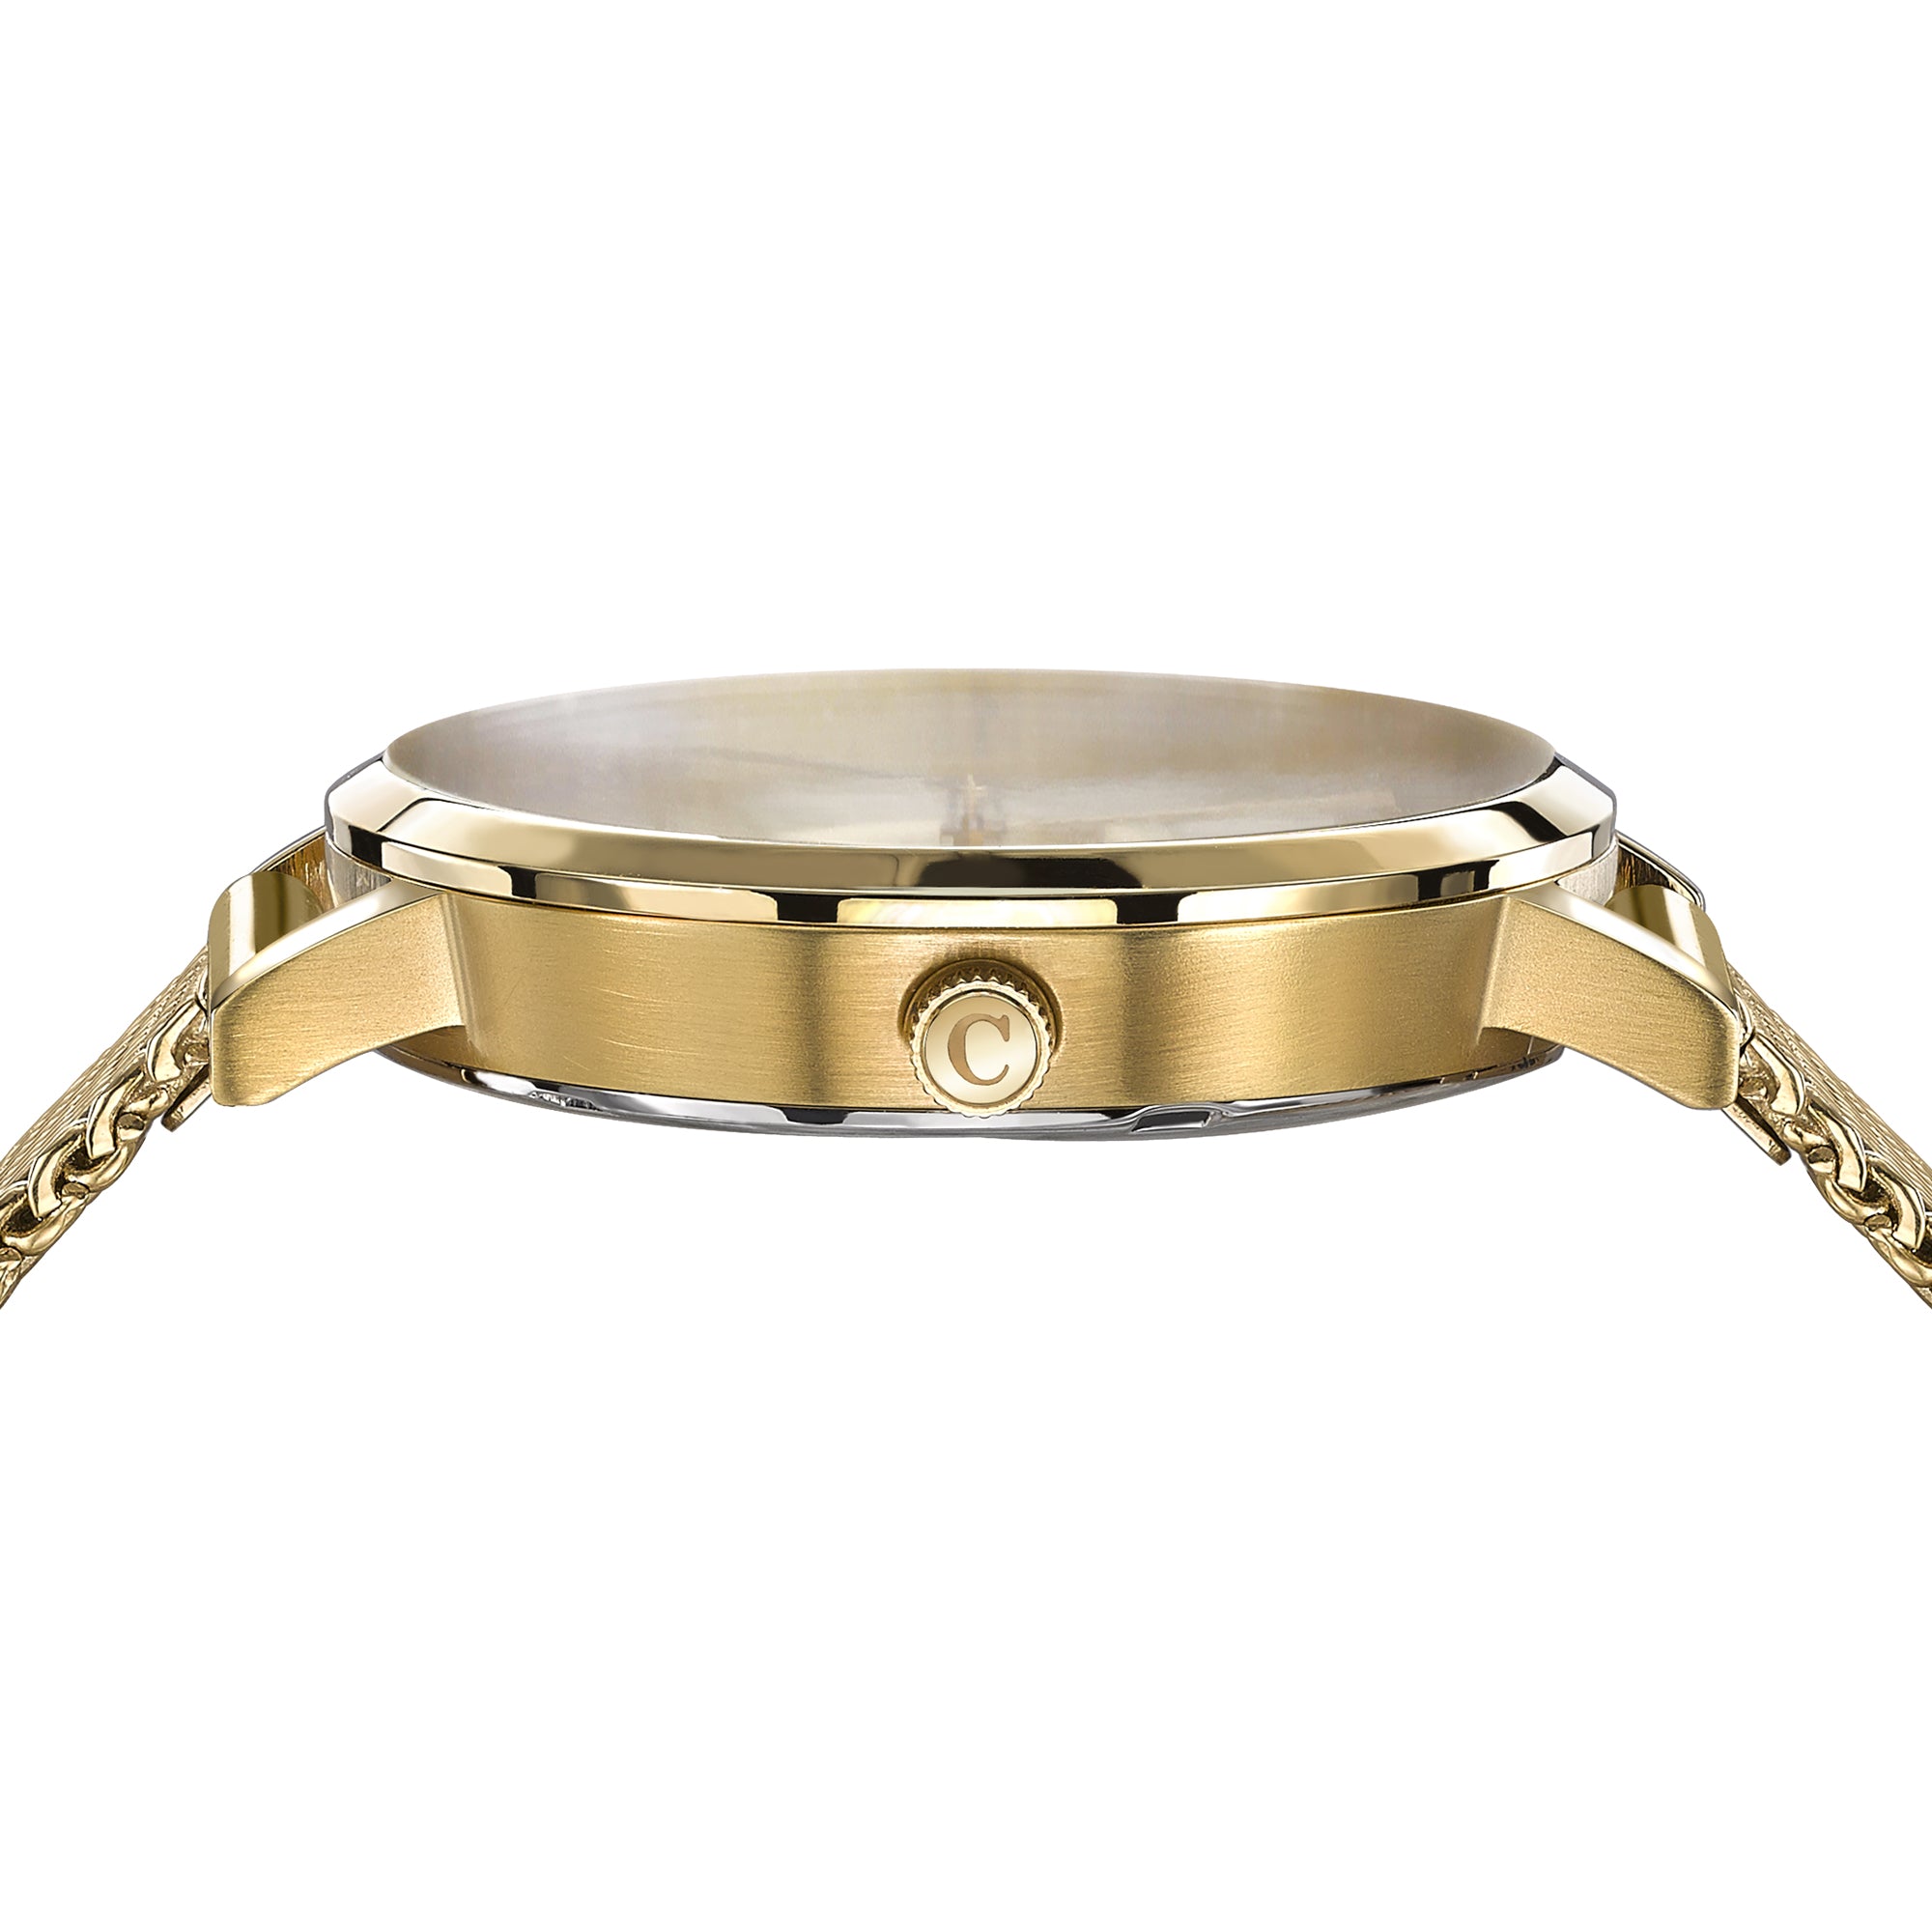 GOLD No.27 WATCH WITH GOLD DIAL AND MESH BRACELET